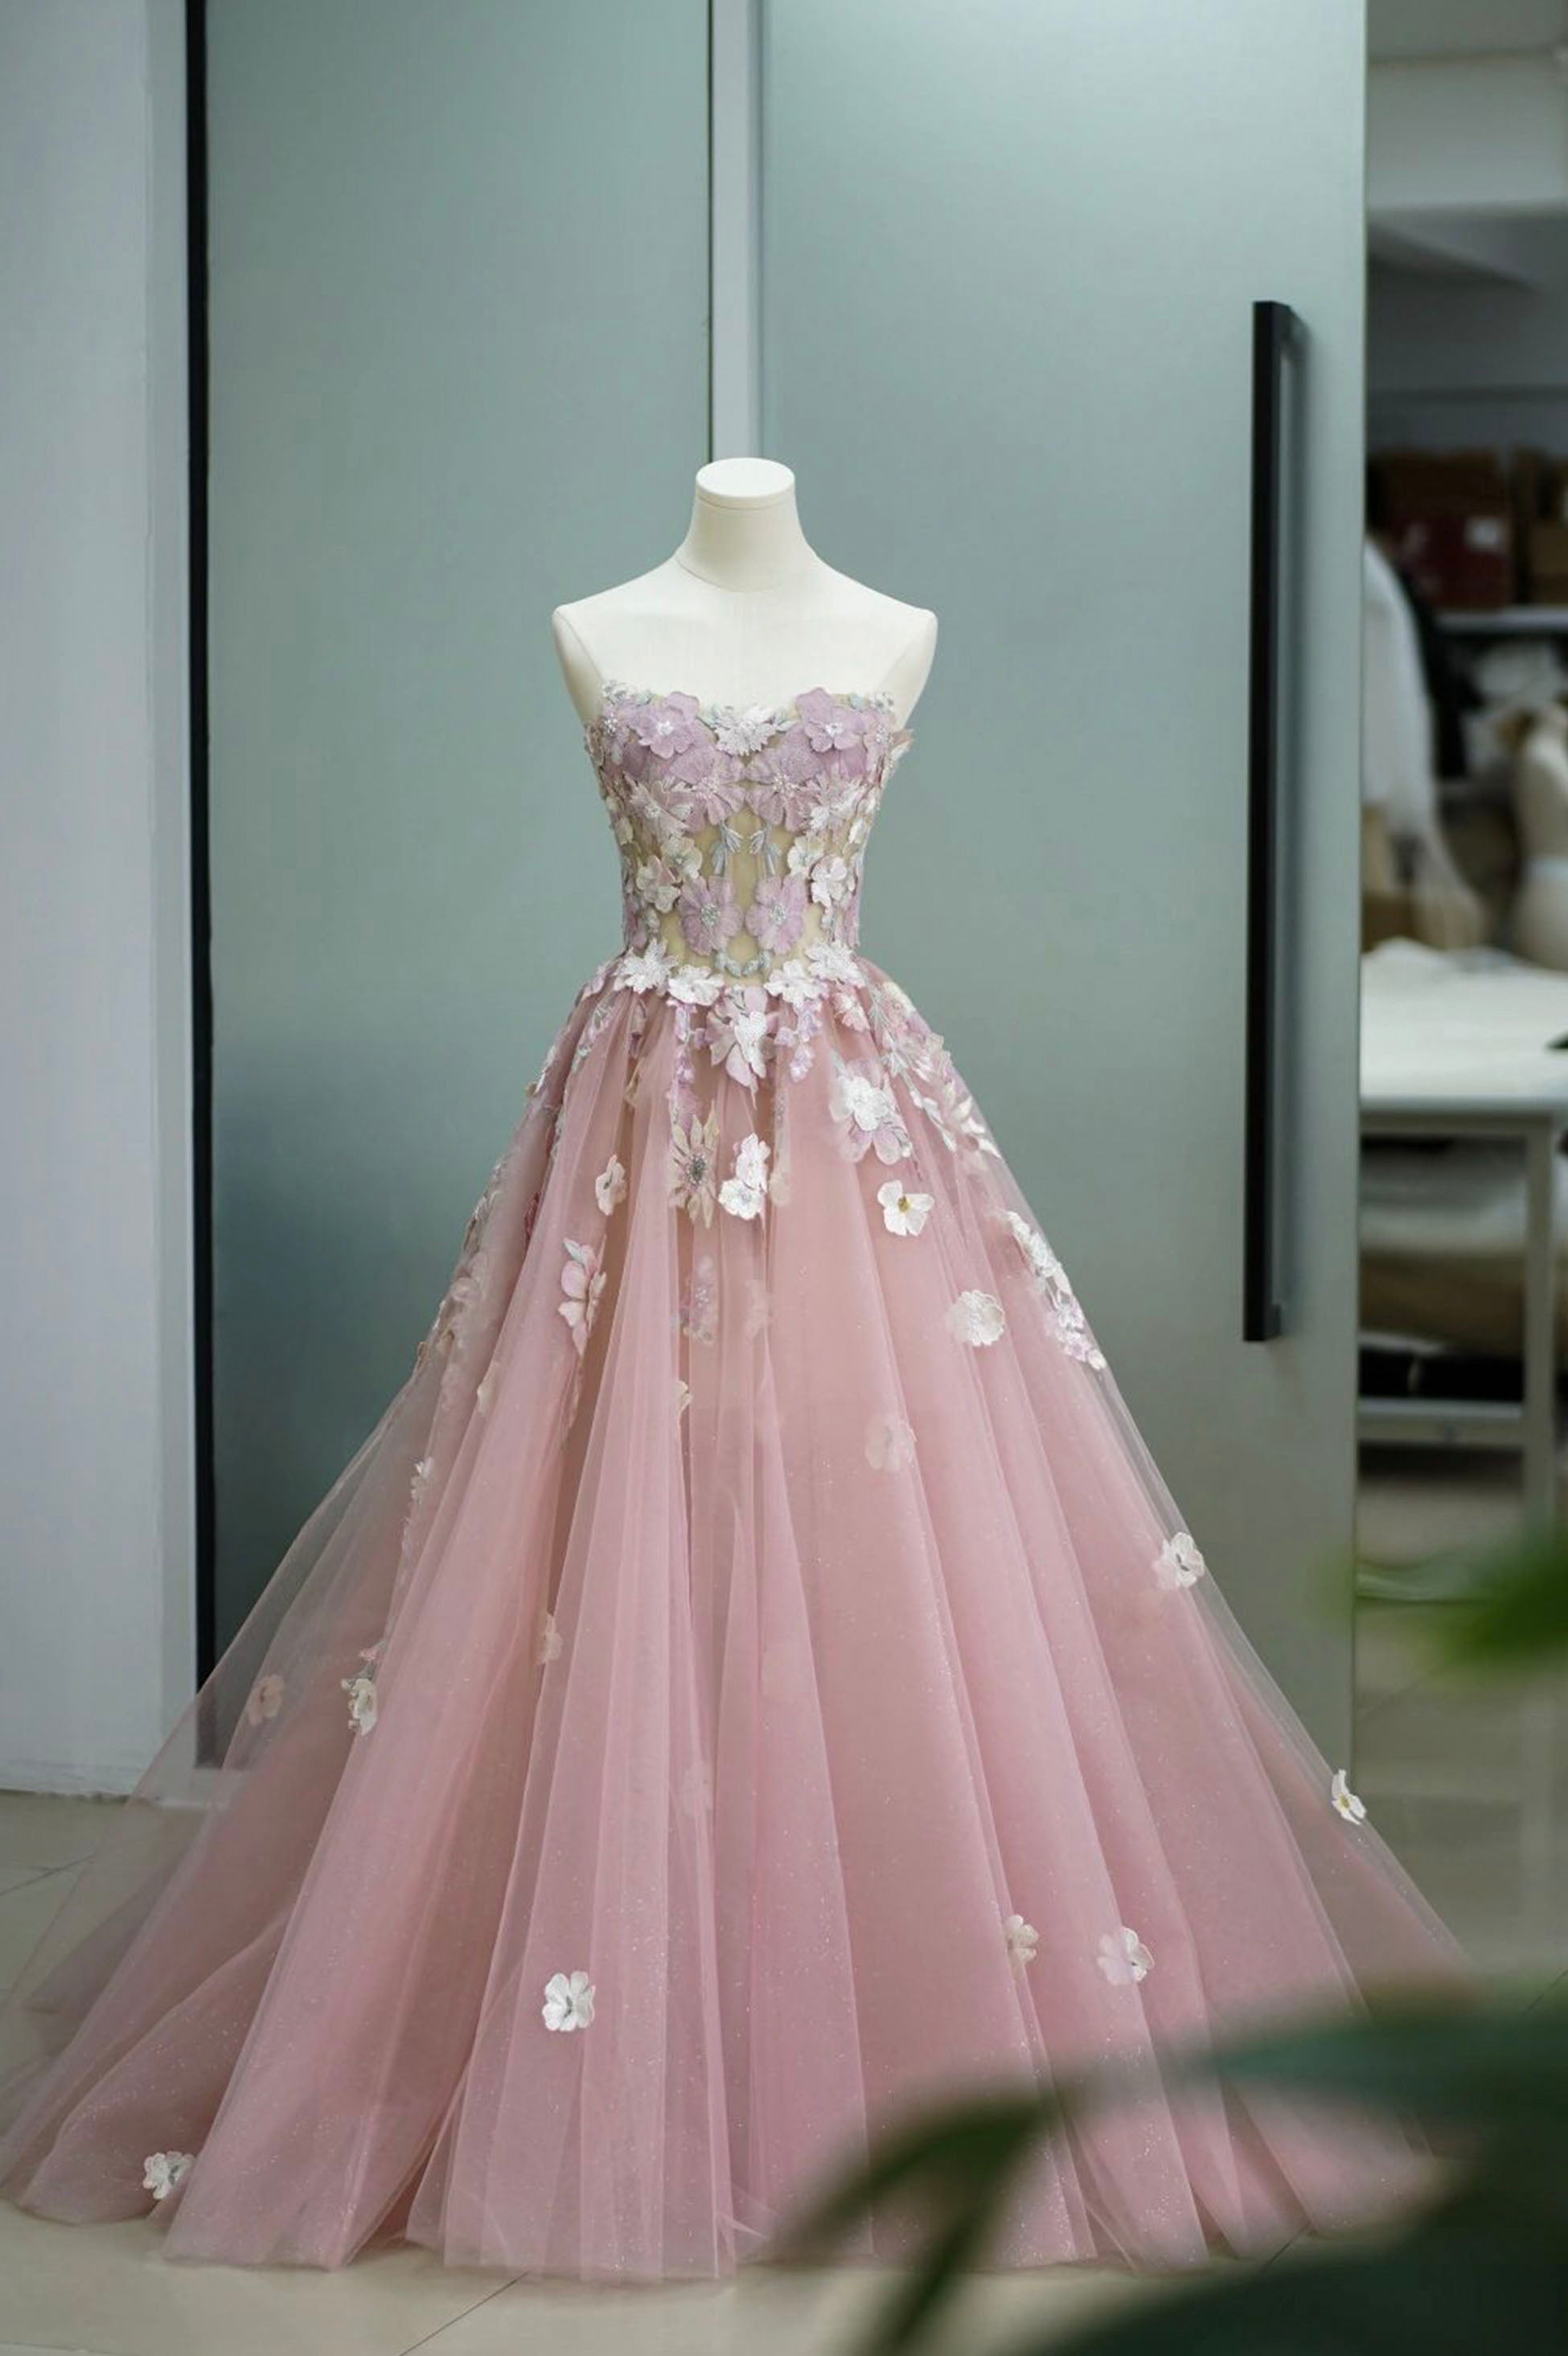 Pink Tulle Lace Long Prom Dress Outfits For Girls, Strapless A-Line Evening Graduation Dress